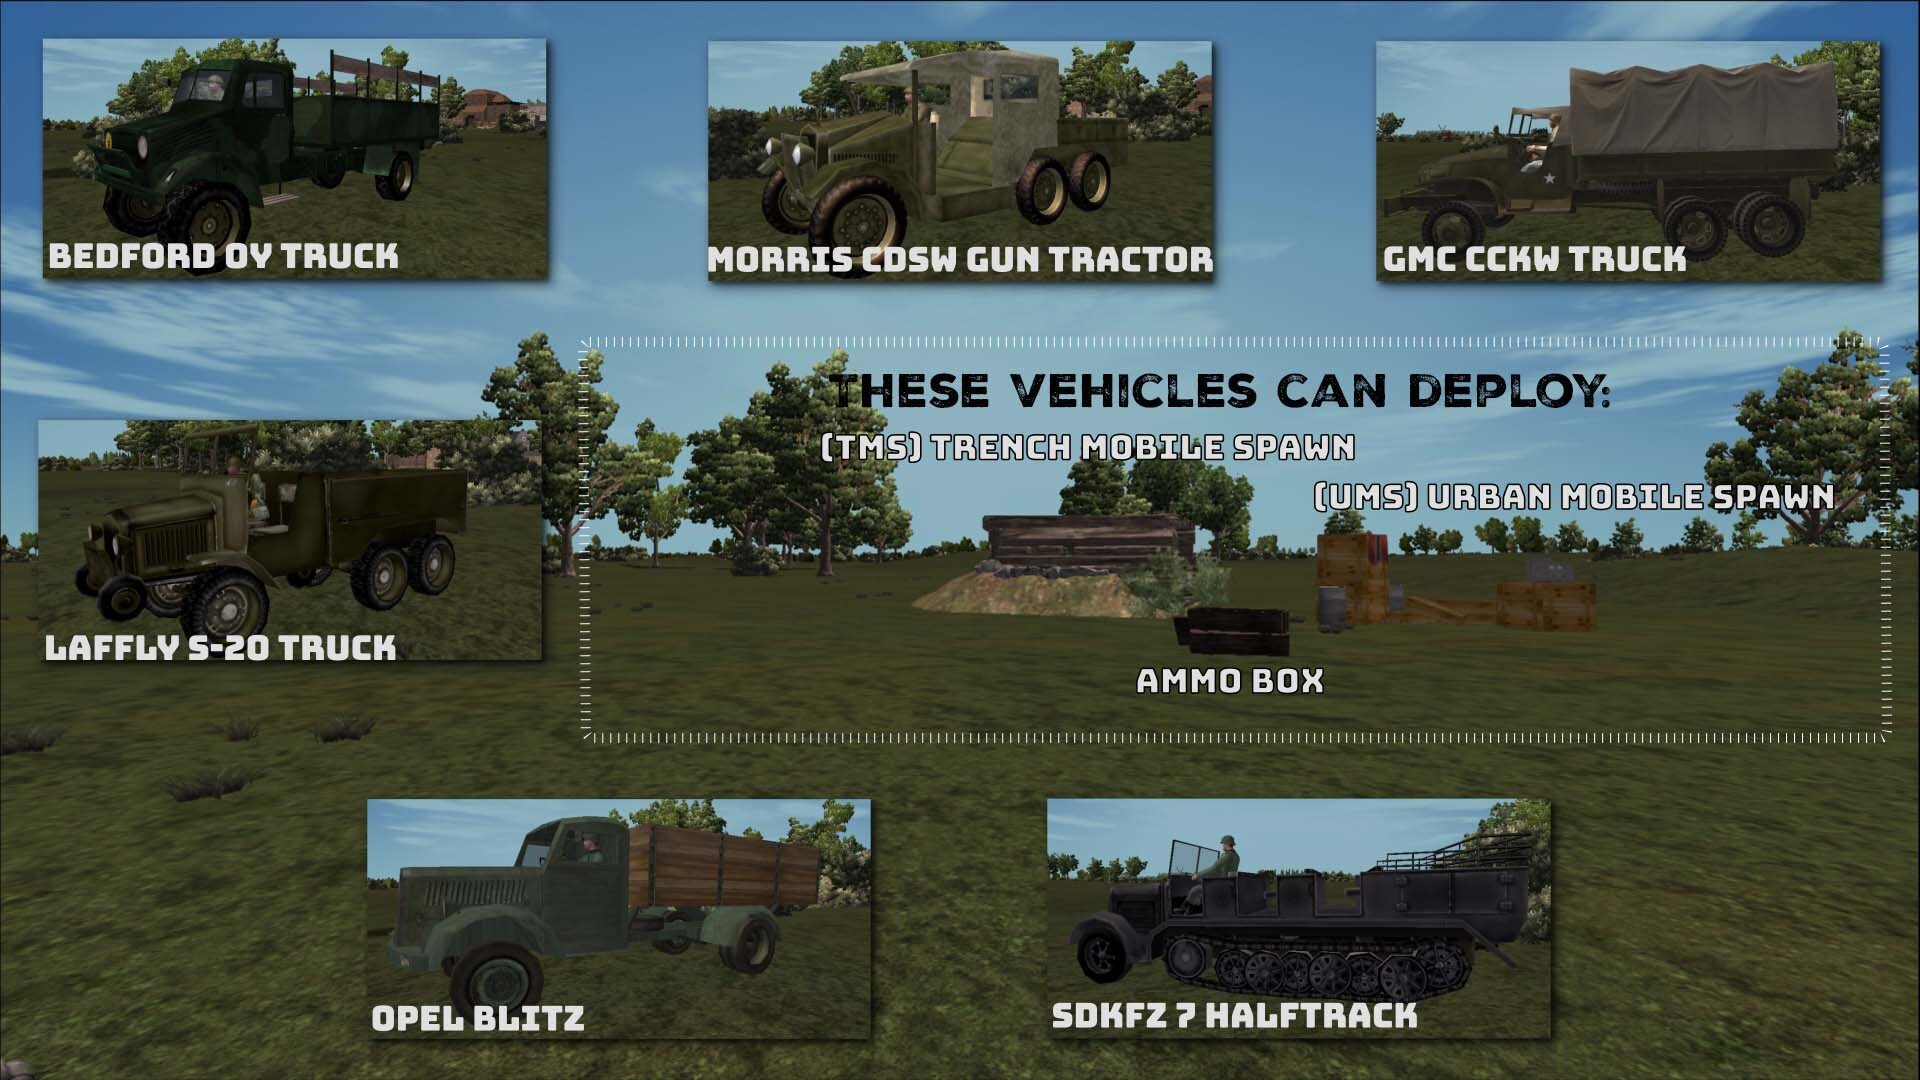 WWII Online Vehicles that can deploy the light mobile spawns